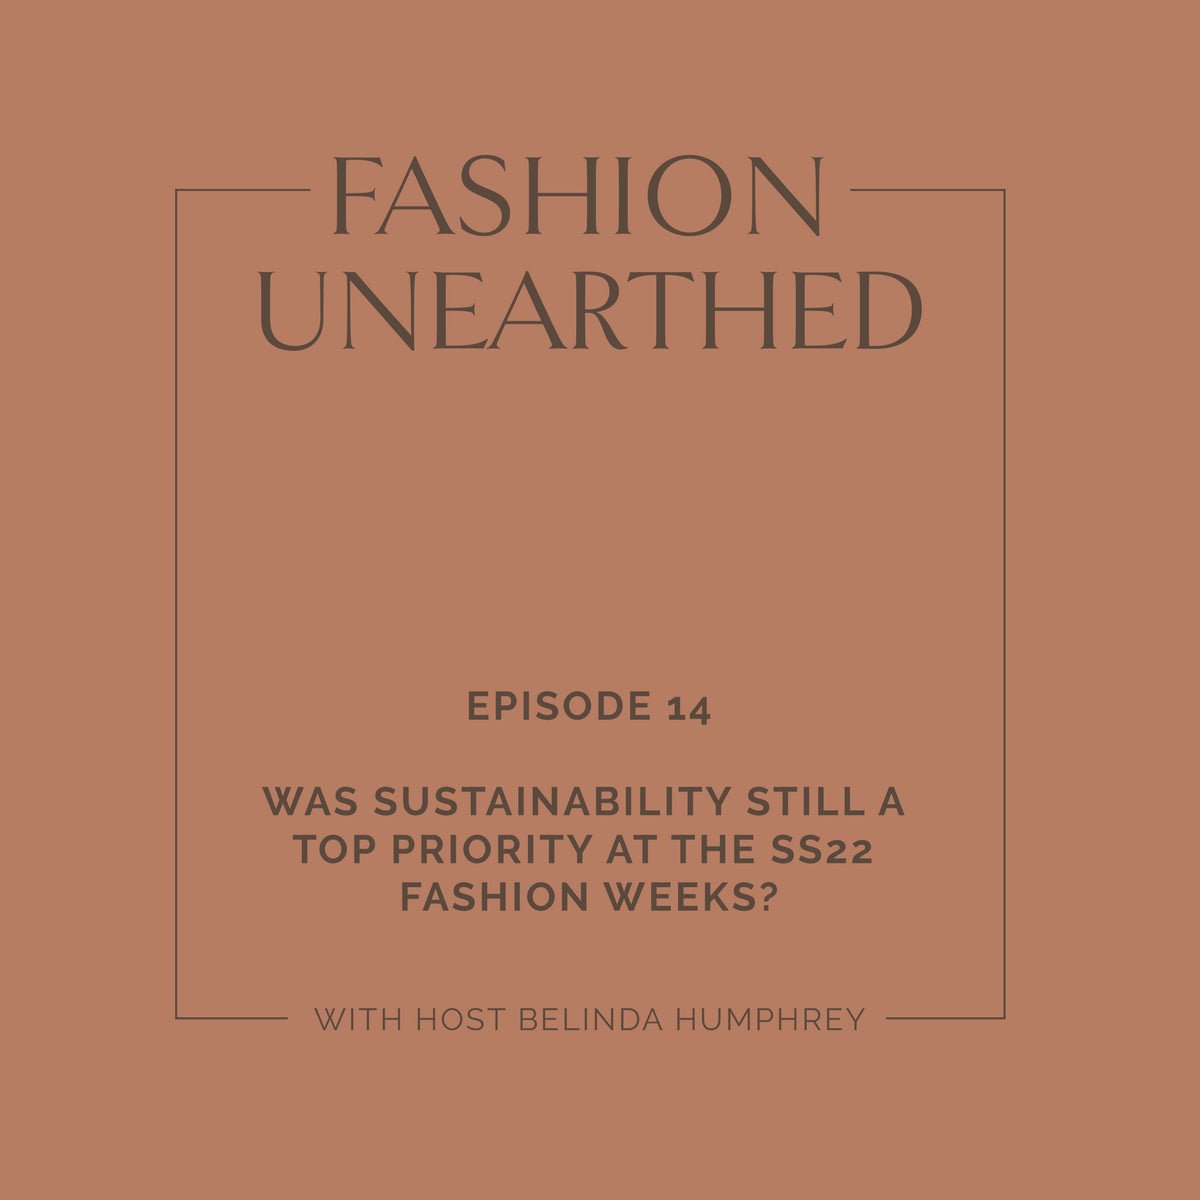 Episode 14: Was sustainability still a top priority at the SS22 Fashion Weeks?